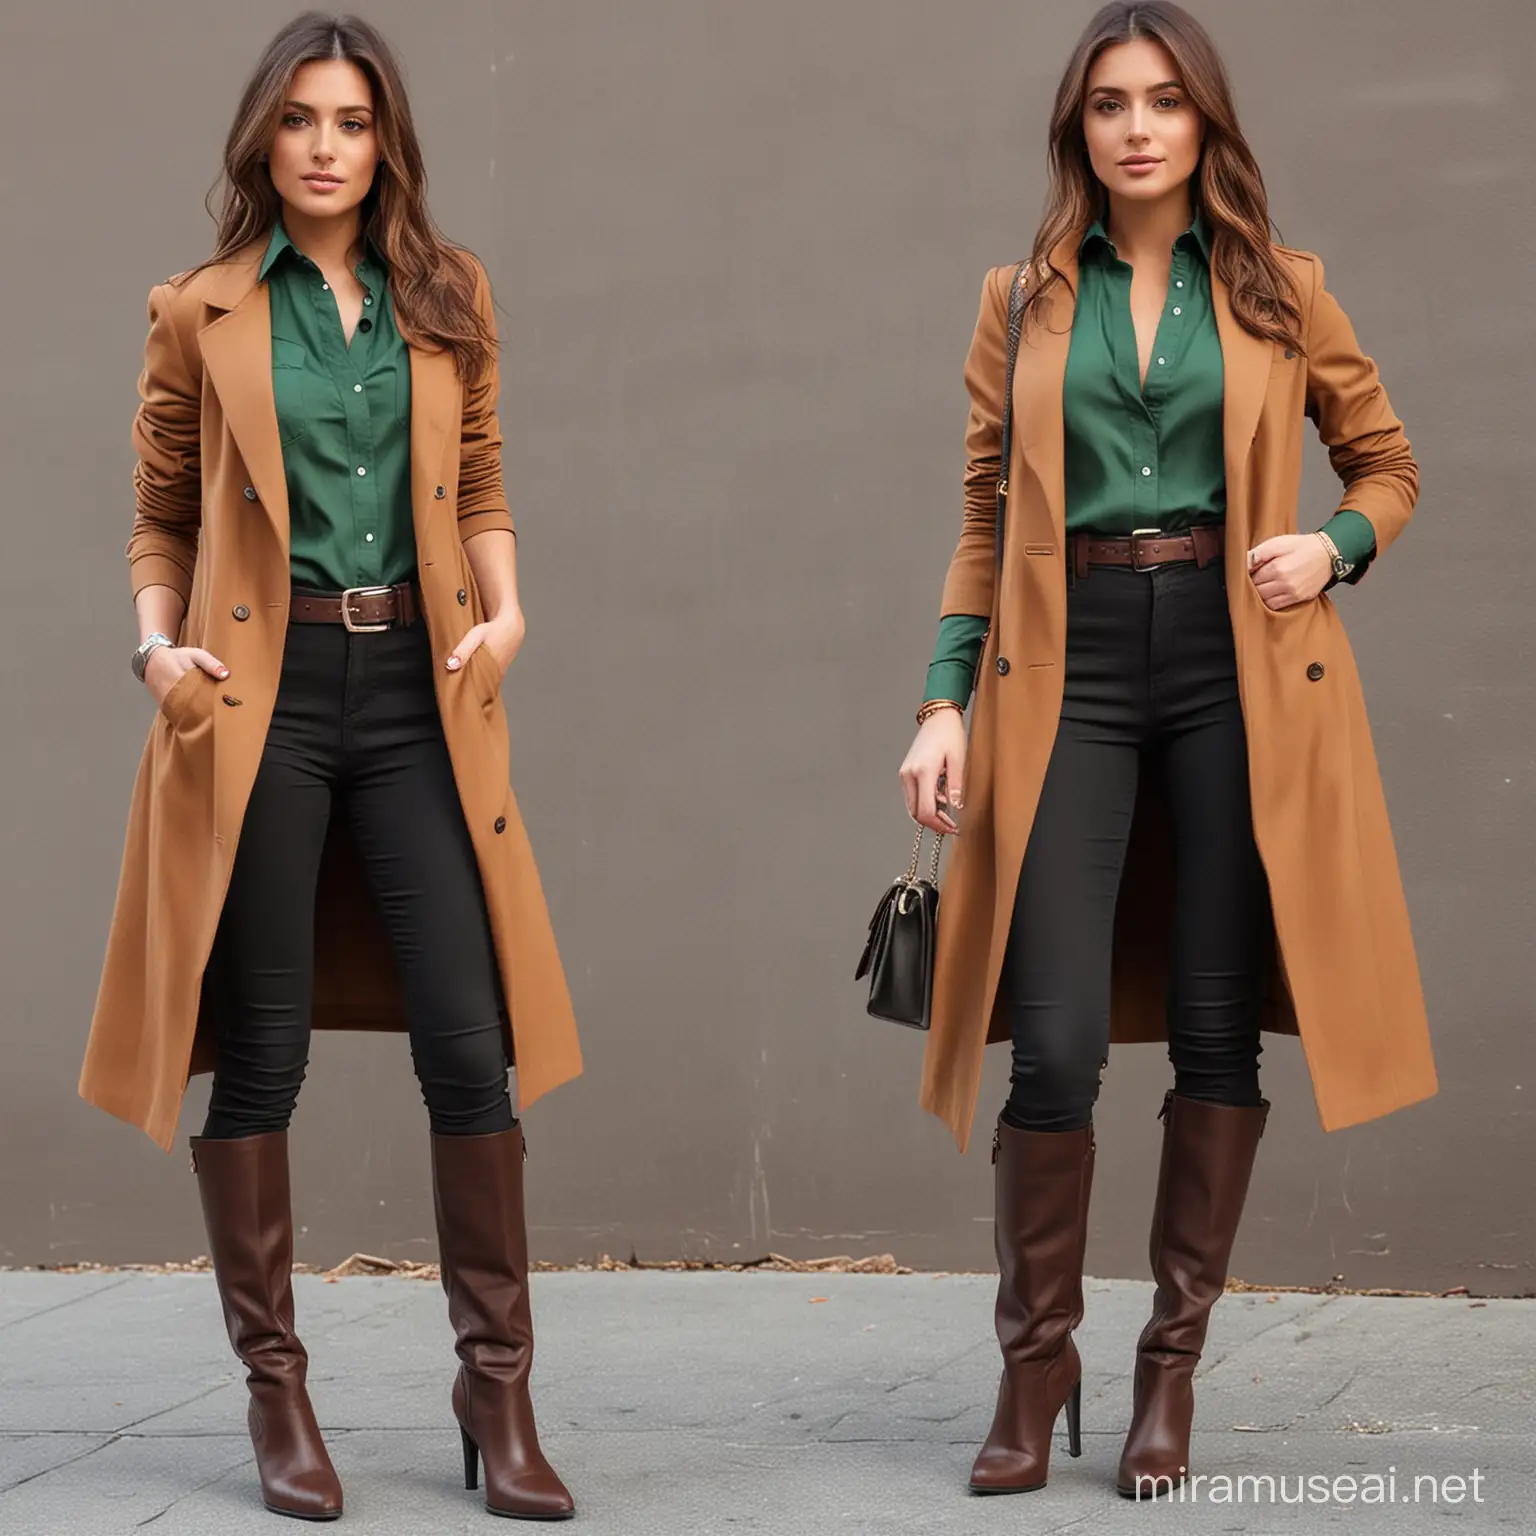 Design a luxury, fashionable, stylish, high standard, modern, sexy, business casual dress with brown long coat and green shirt for a tomboy woman wearing low heel boots based on the theme of the old aesthetic money